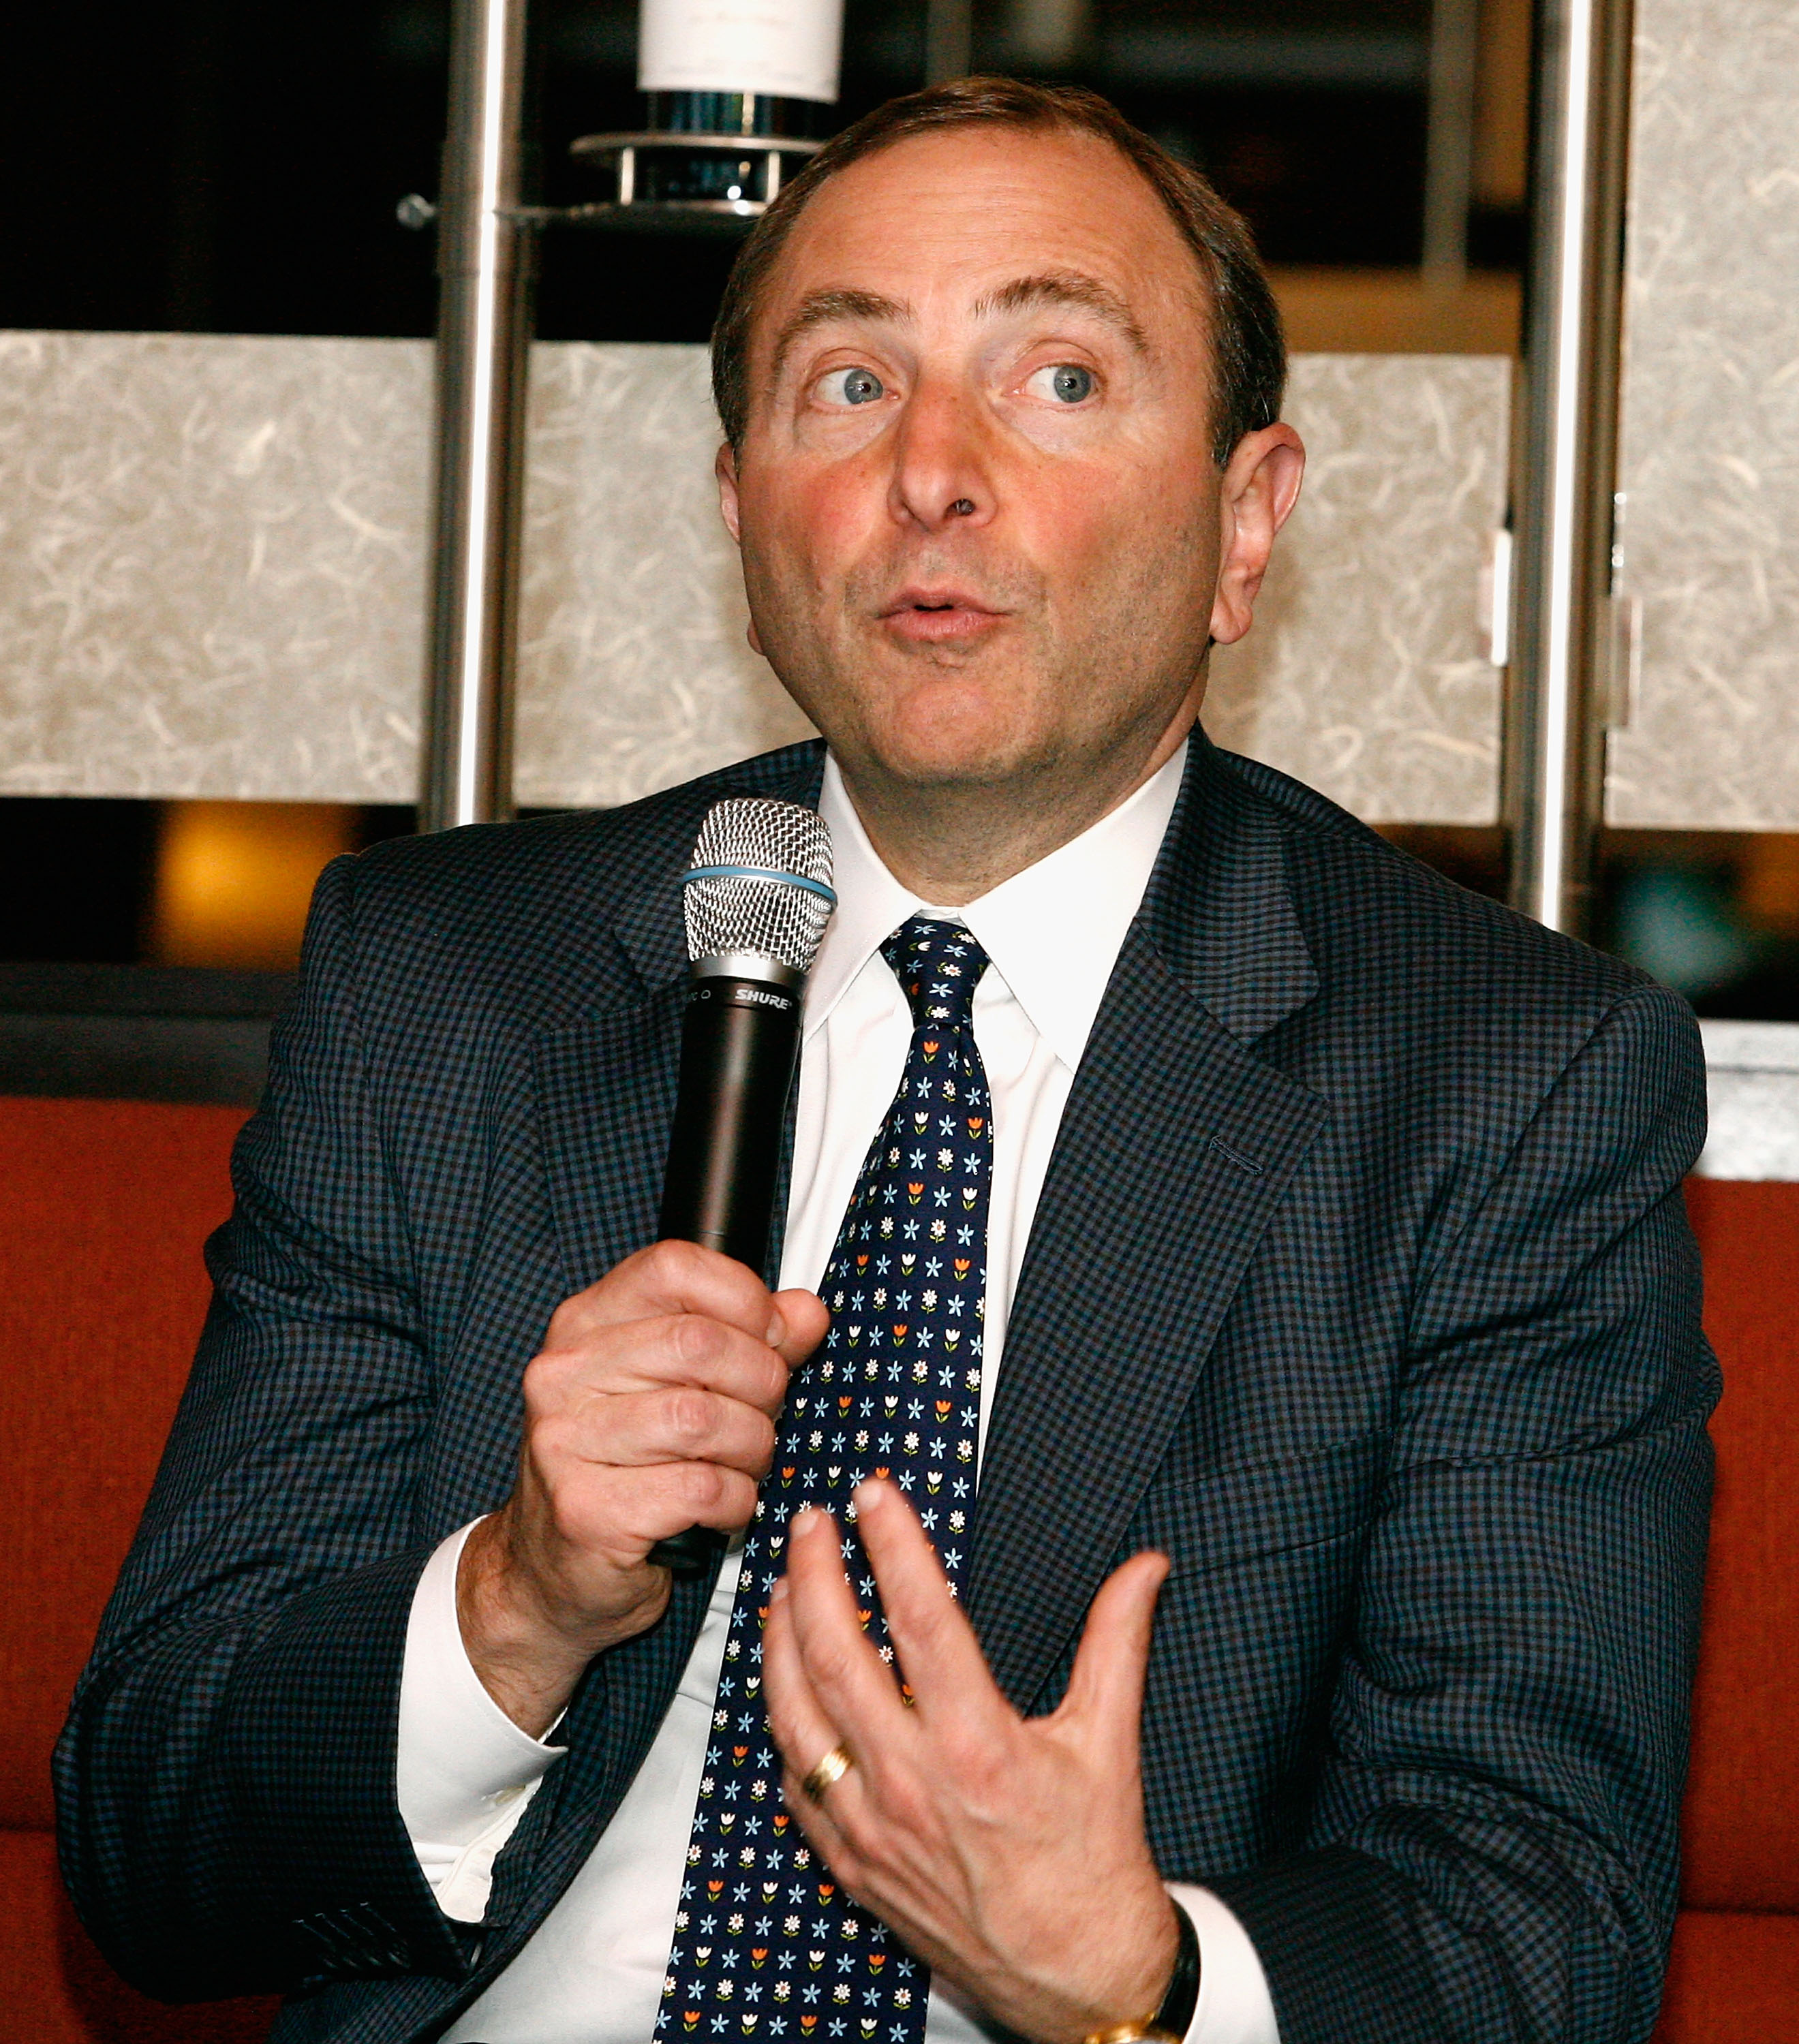 OTTAWA, ON - JUNE 20:  NHL commissioner, Gary Bettman speaks during the 2008 NHL Panel Discussion/Commissioners Lunch at Scotiabank Place on June 20, 2008 in Ottawa, Ontario, Canada.  (Photo by Richard Wolowicz/Getty Images)